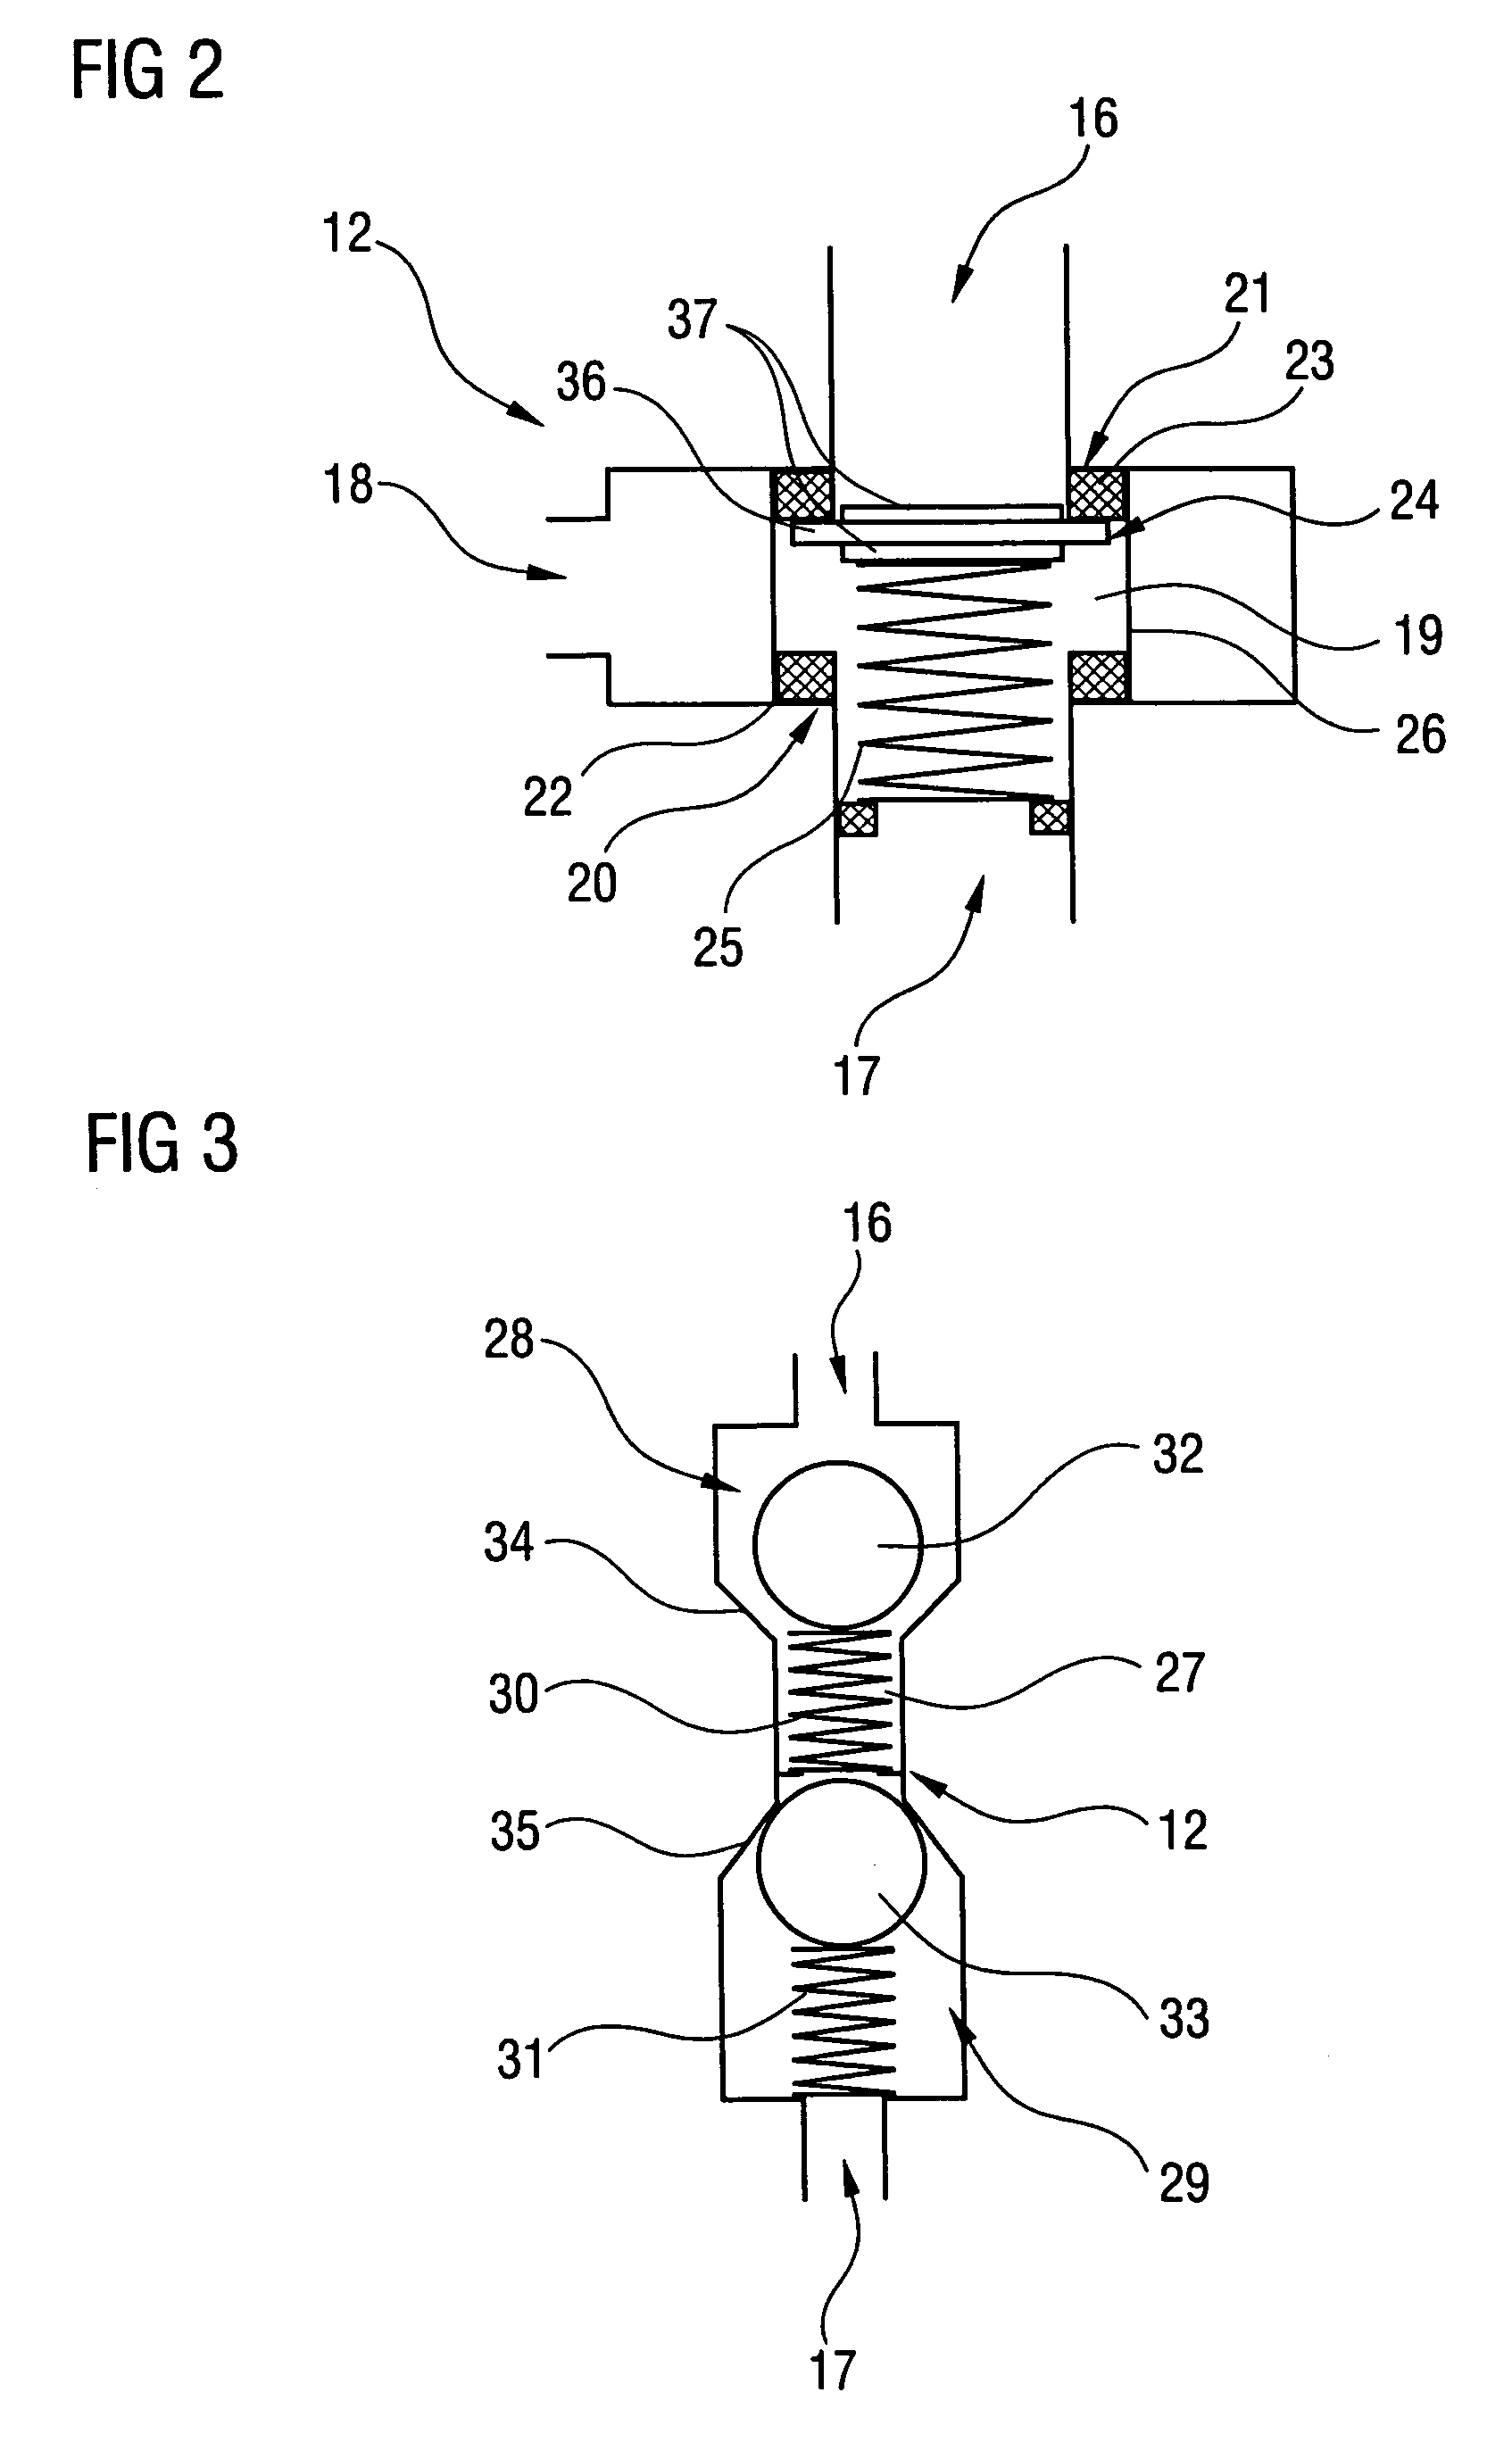 Apparatus for controlling a pressure in a fuel inflow line